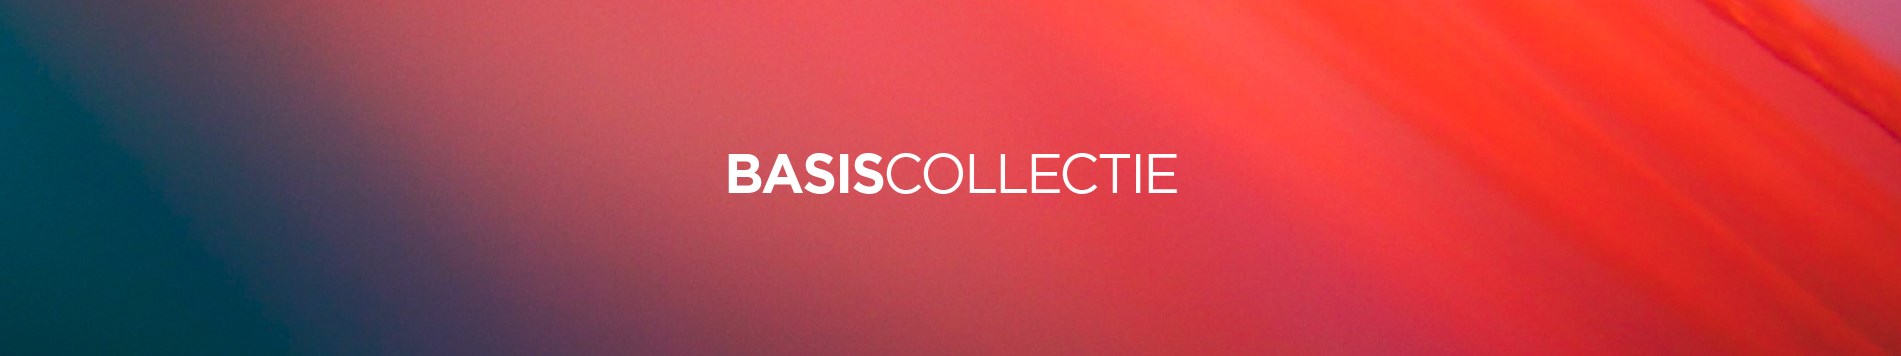 Basis Collectie